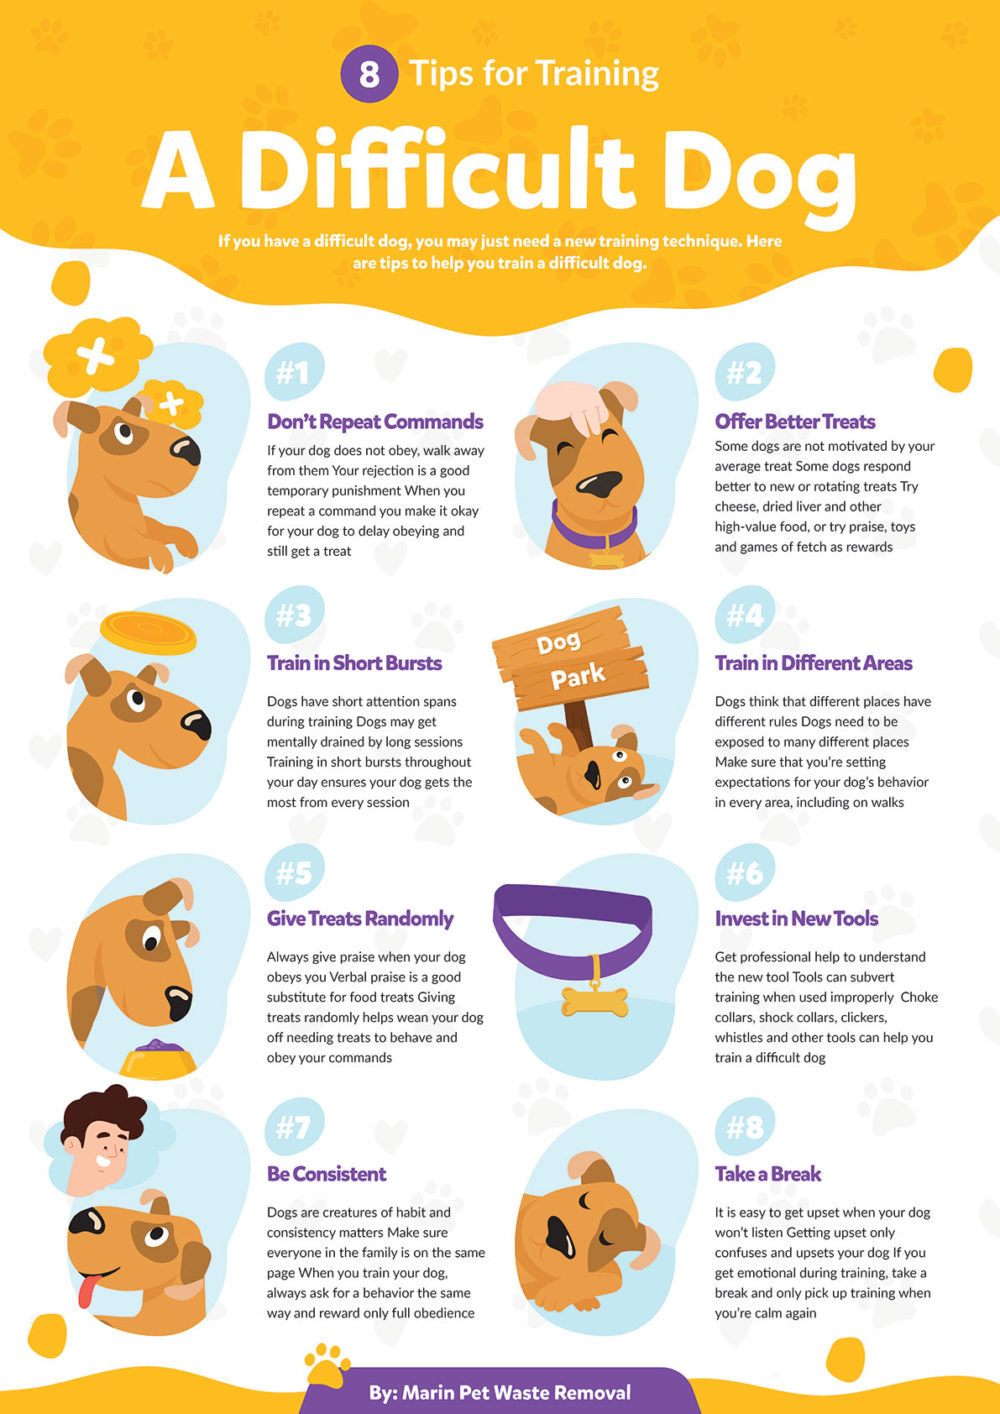 8 Tips for Training a Difficult Dog